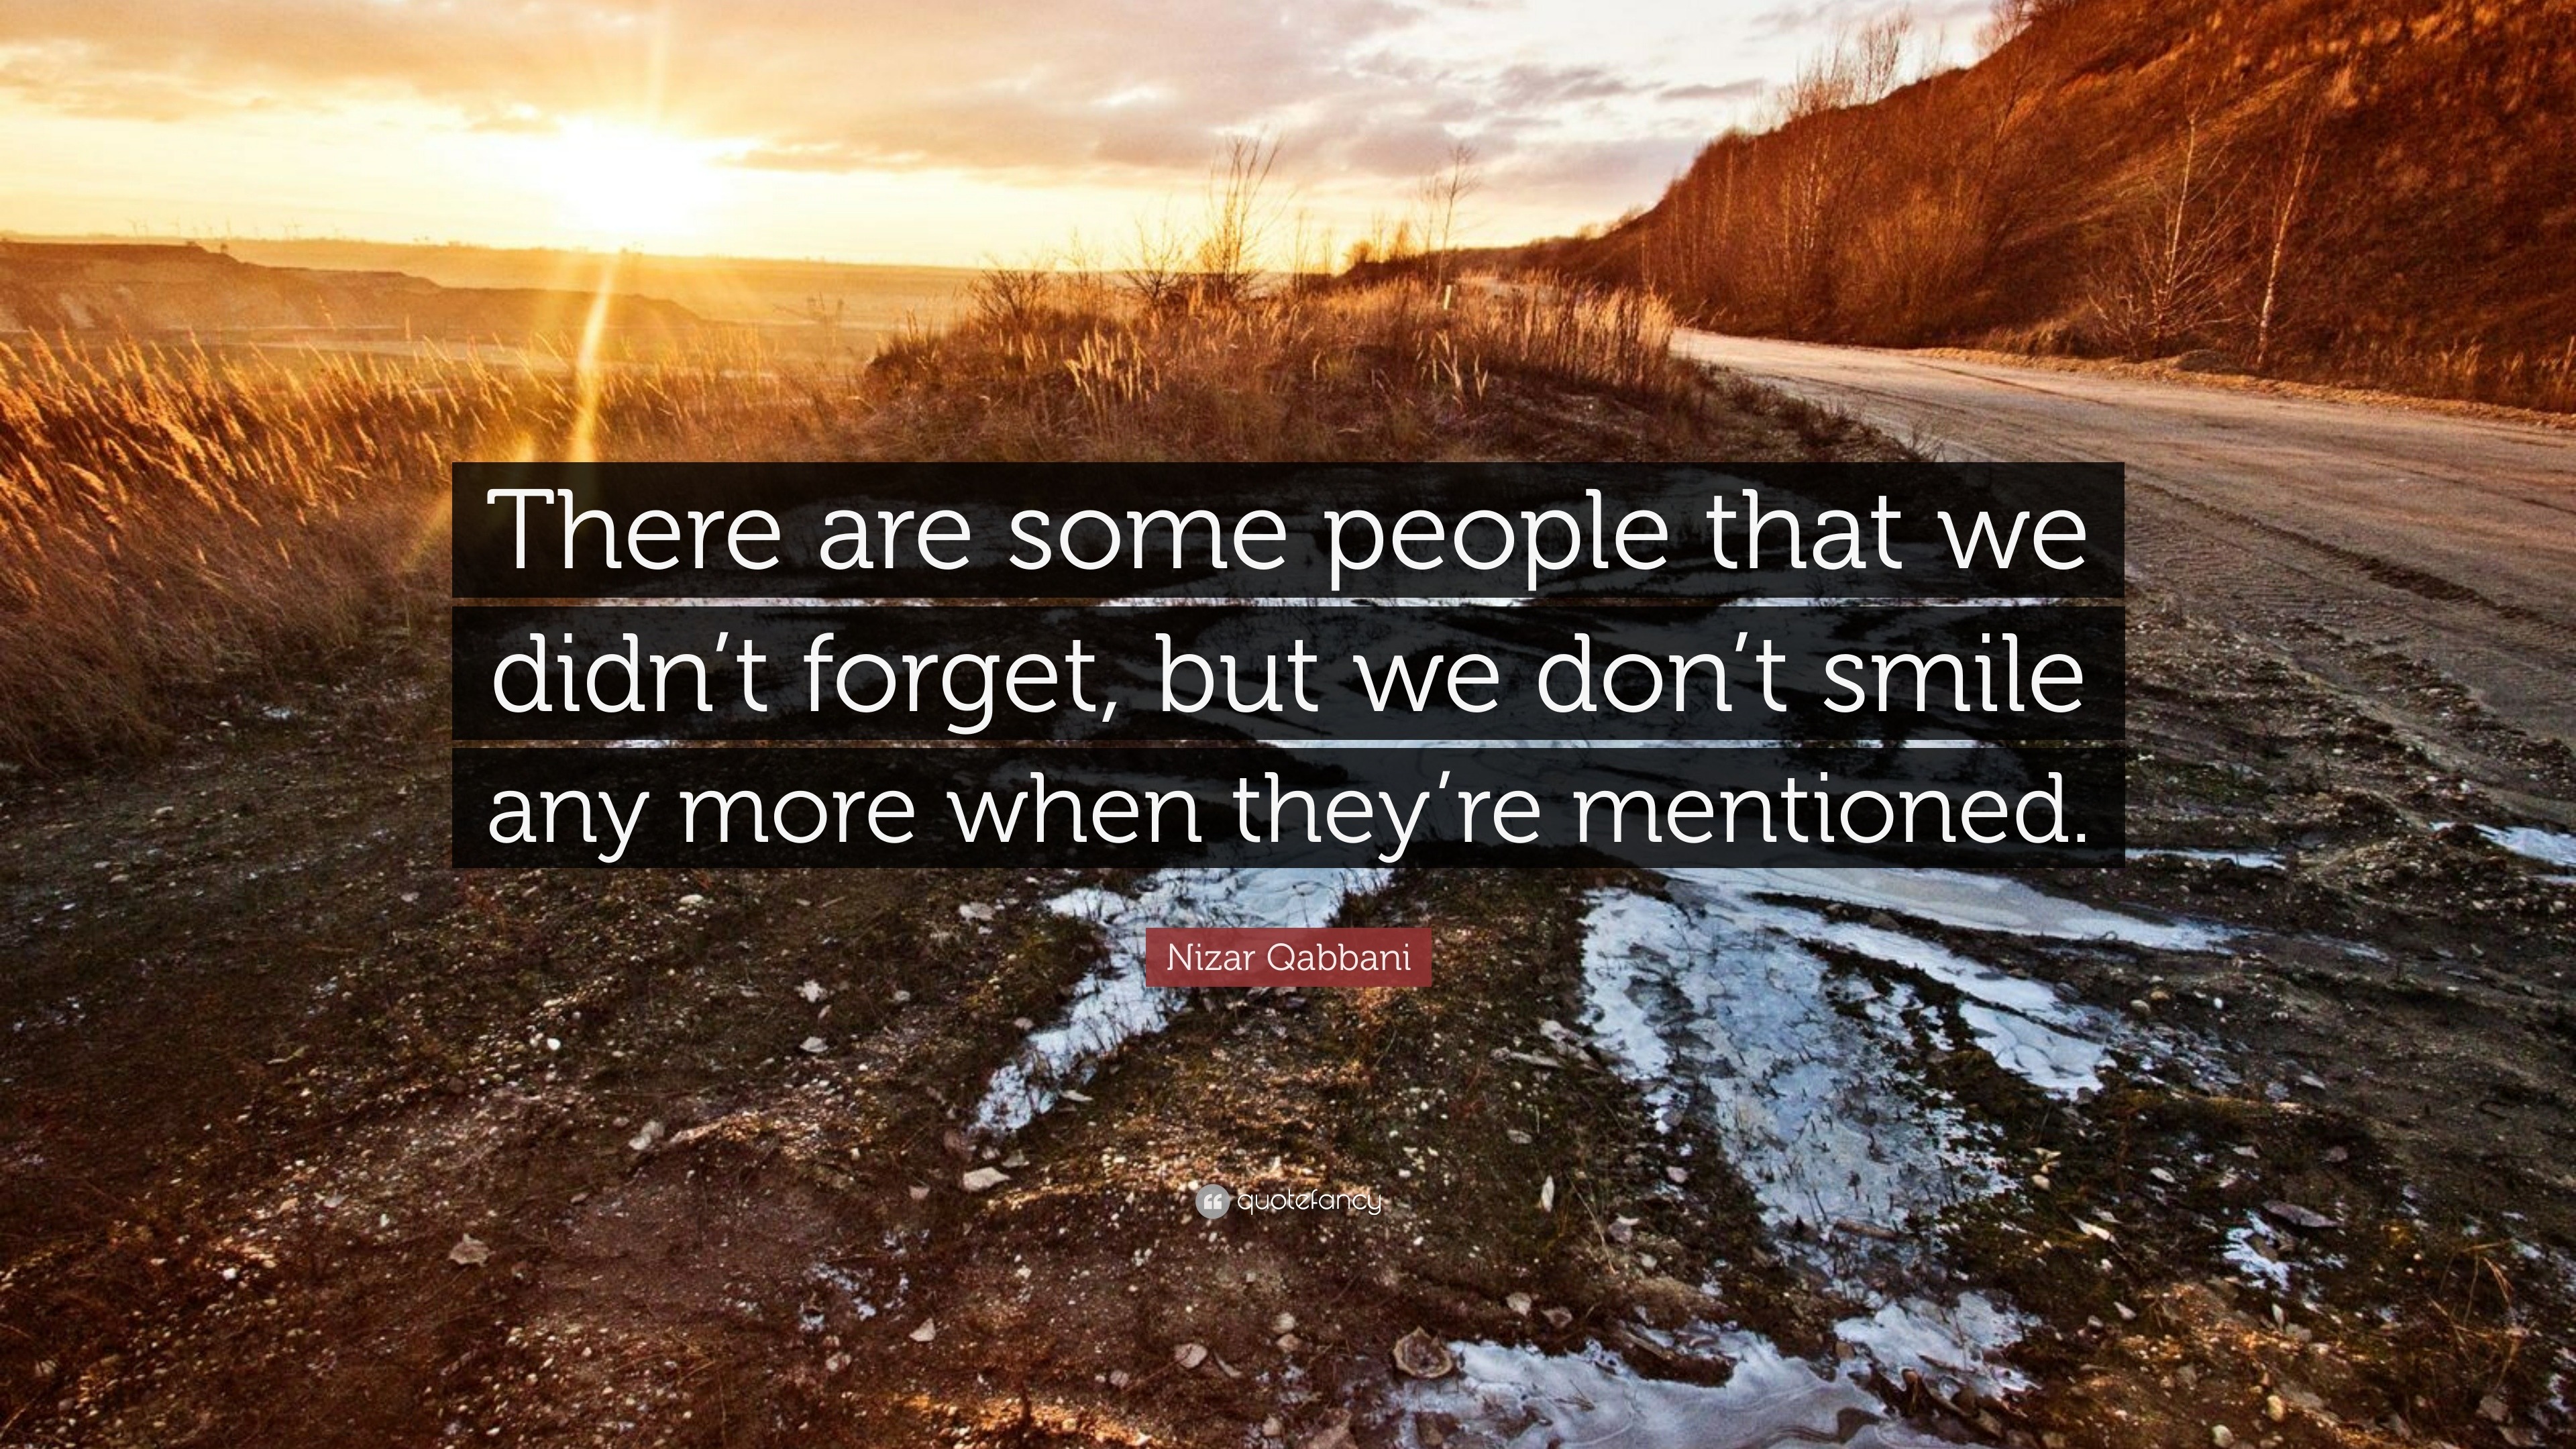 Nizar Qabbani Quote: “There are some people that we didn't forget